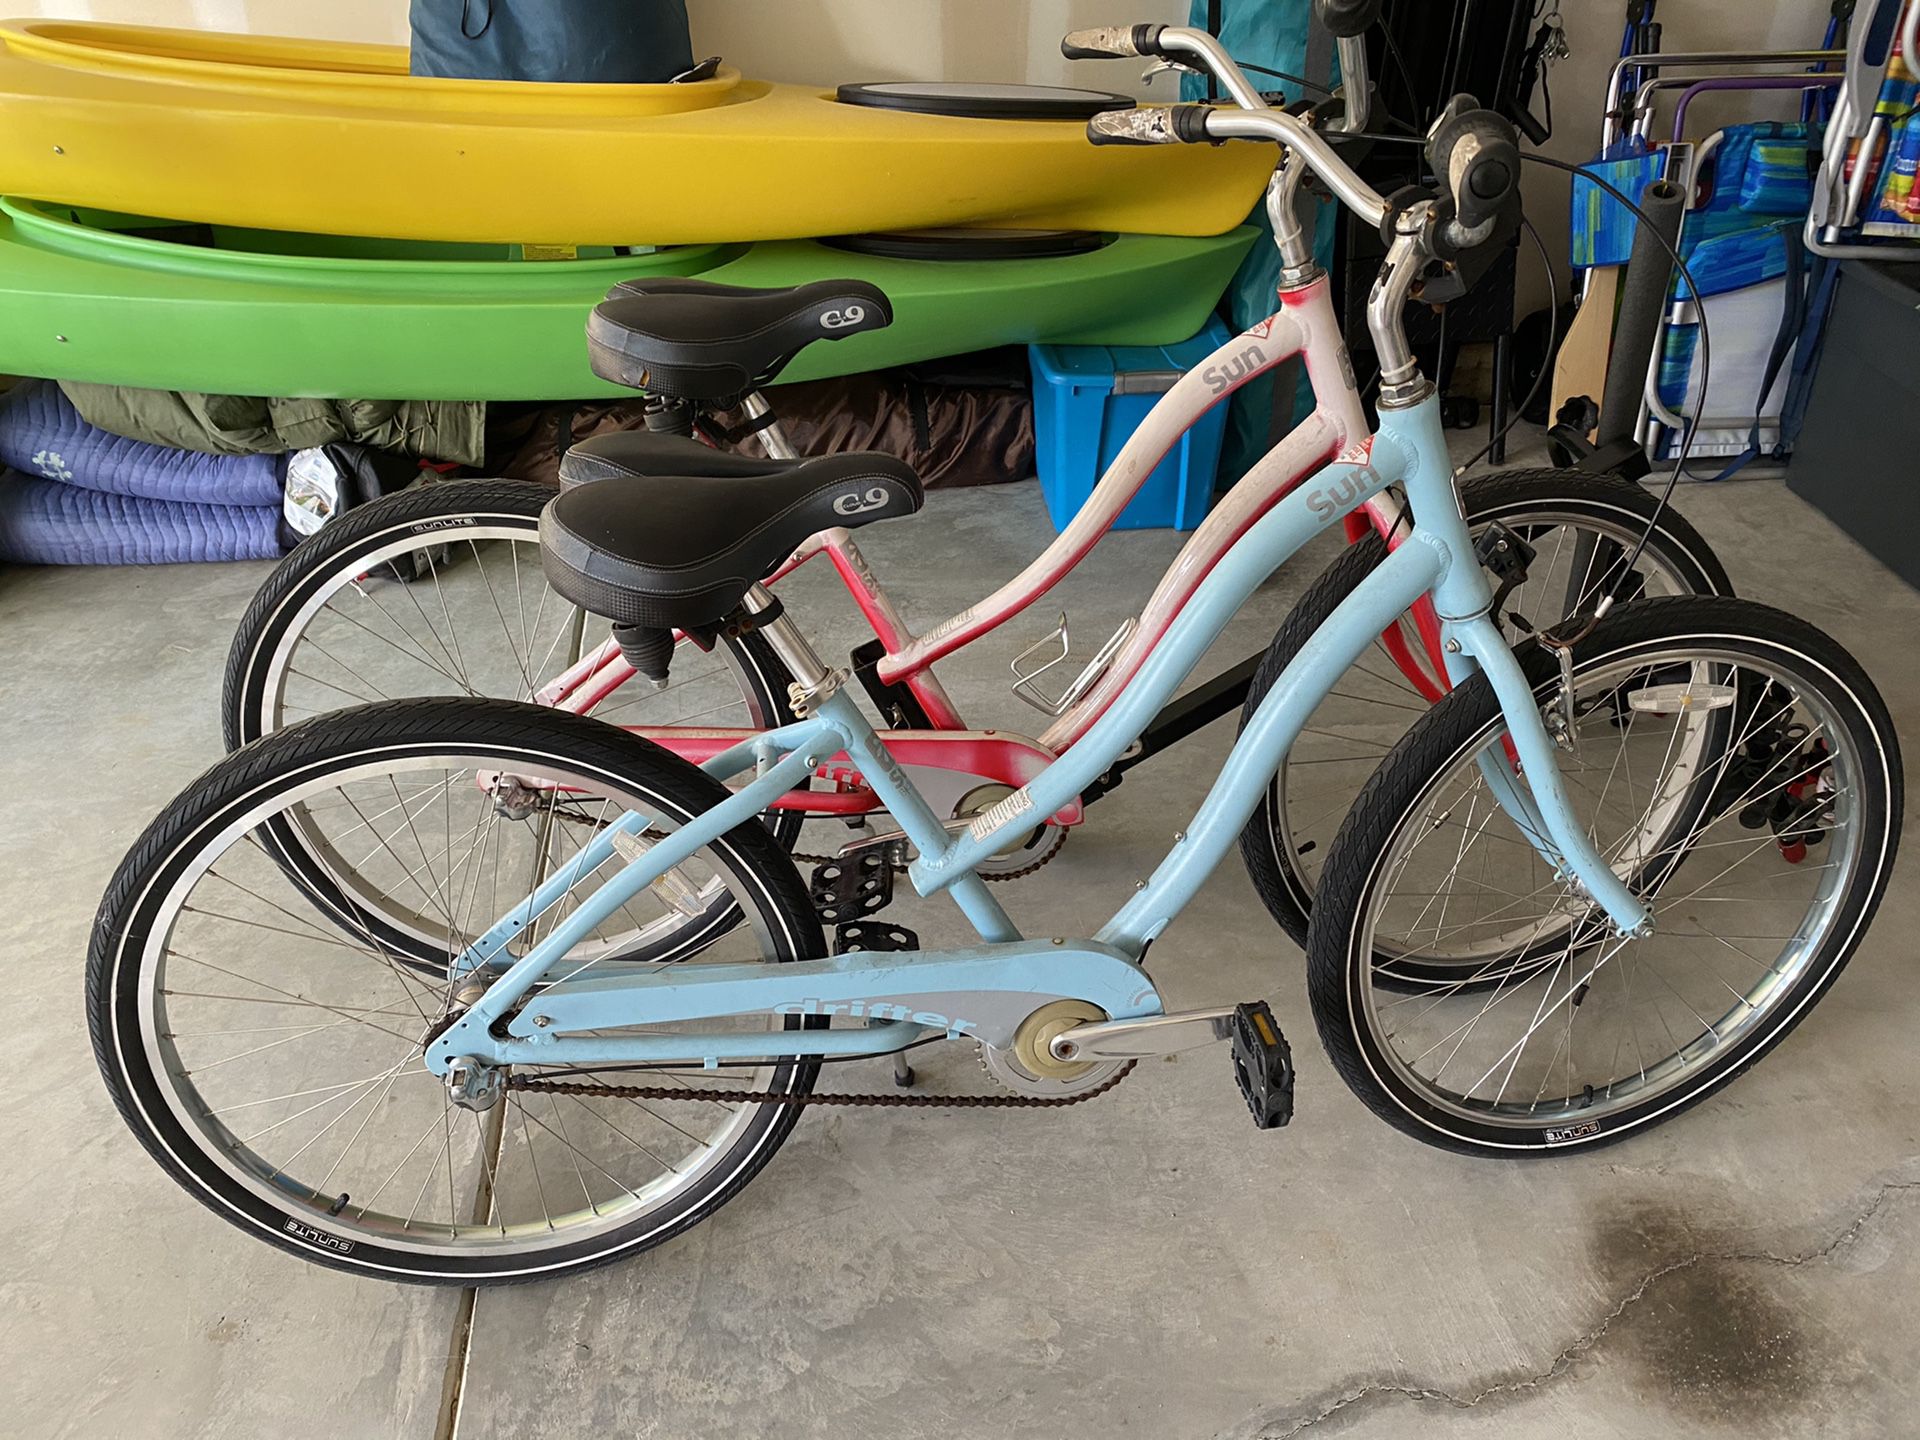 Pending Pick-up: Free! 2 Sun Bicycles